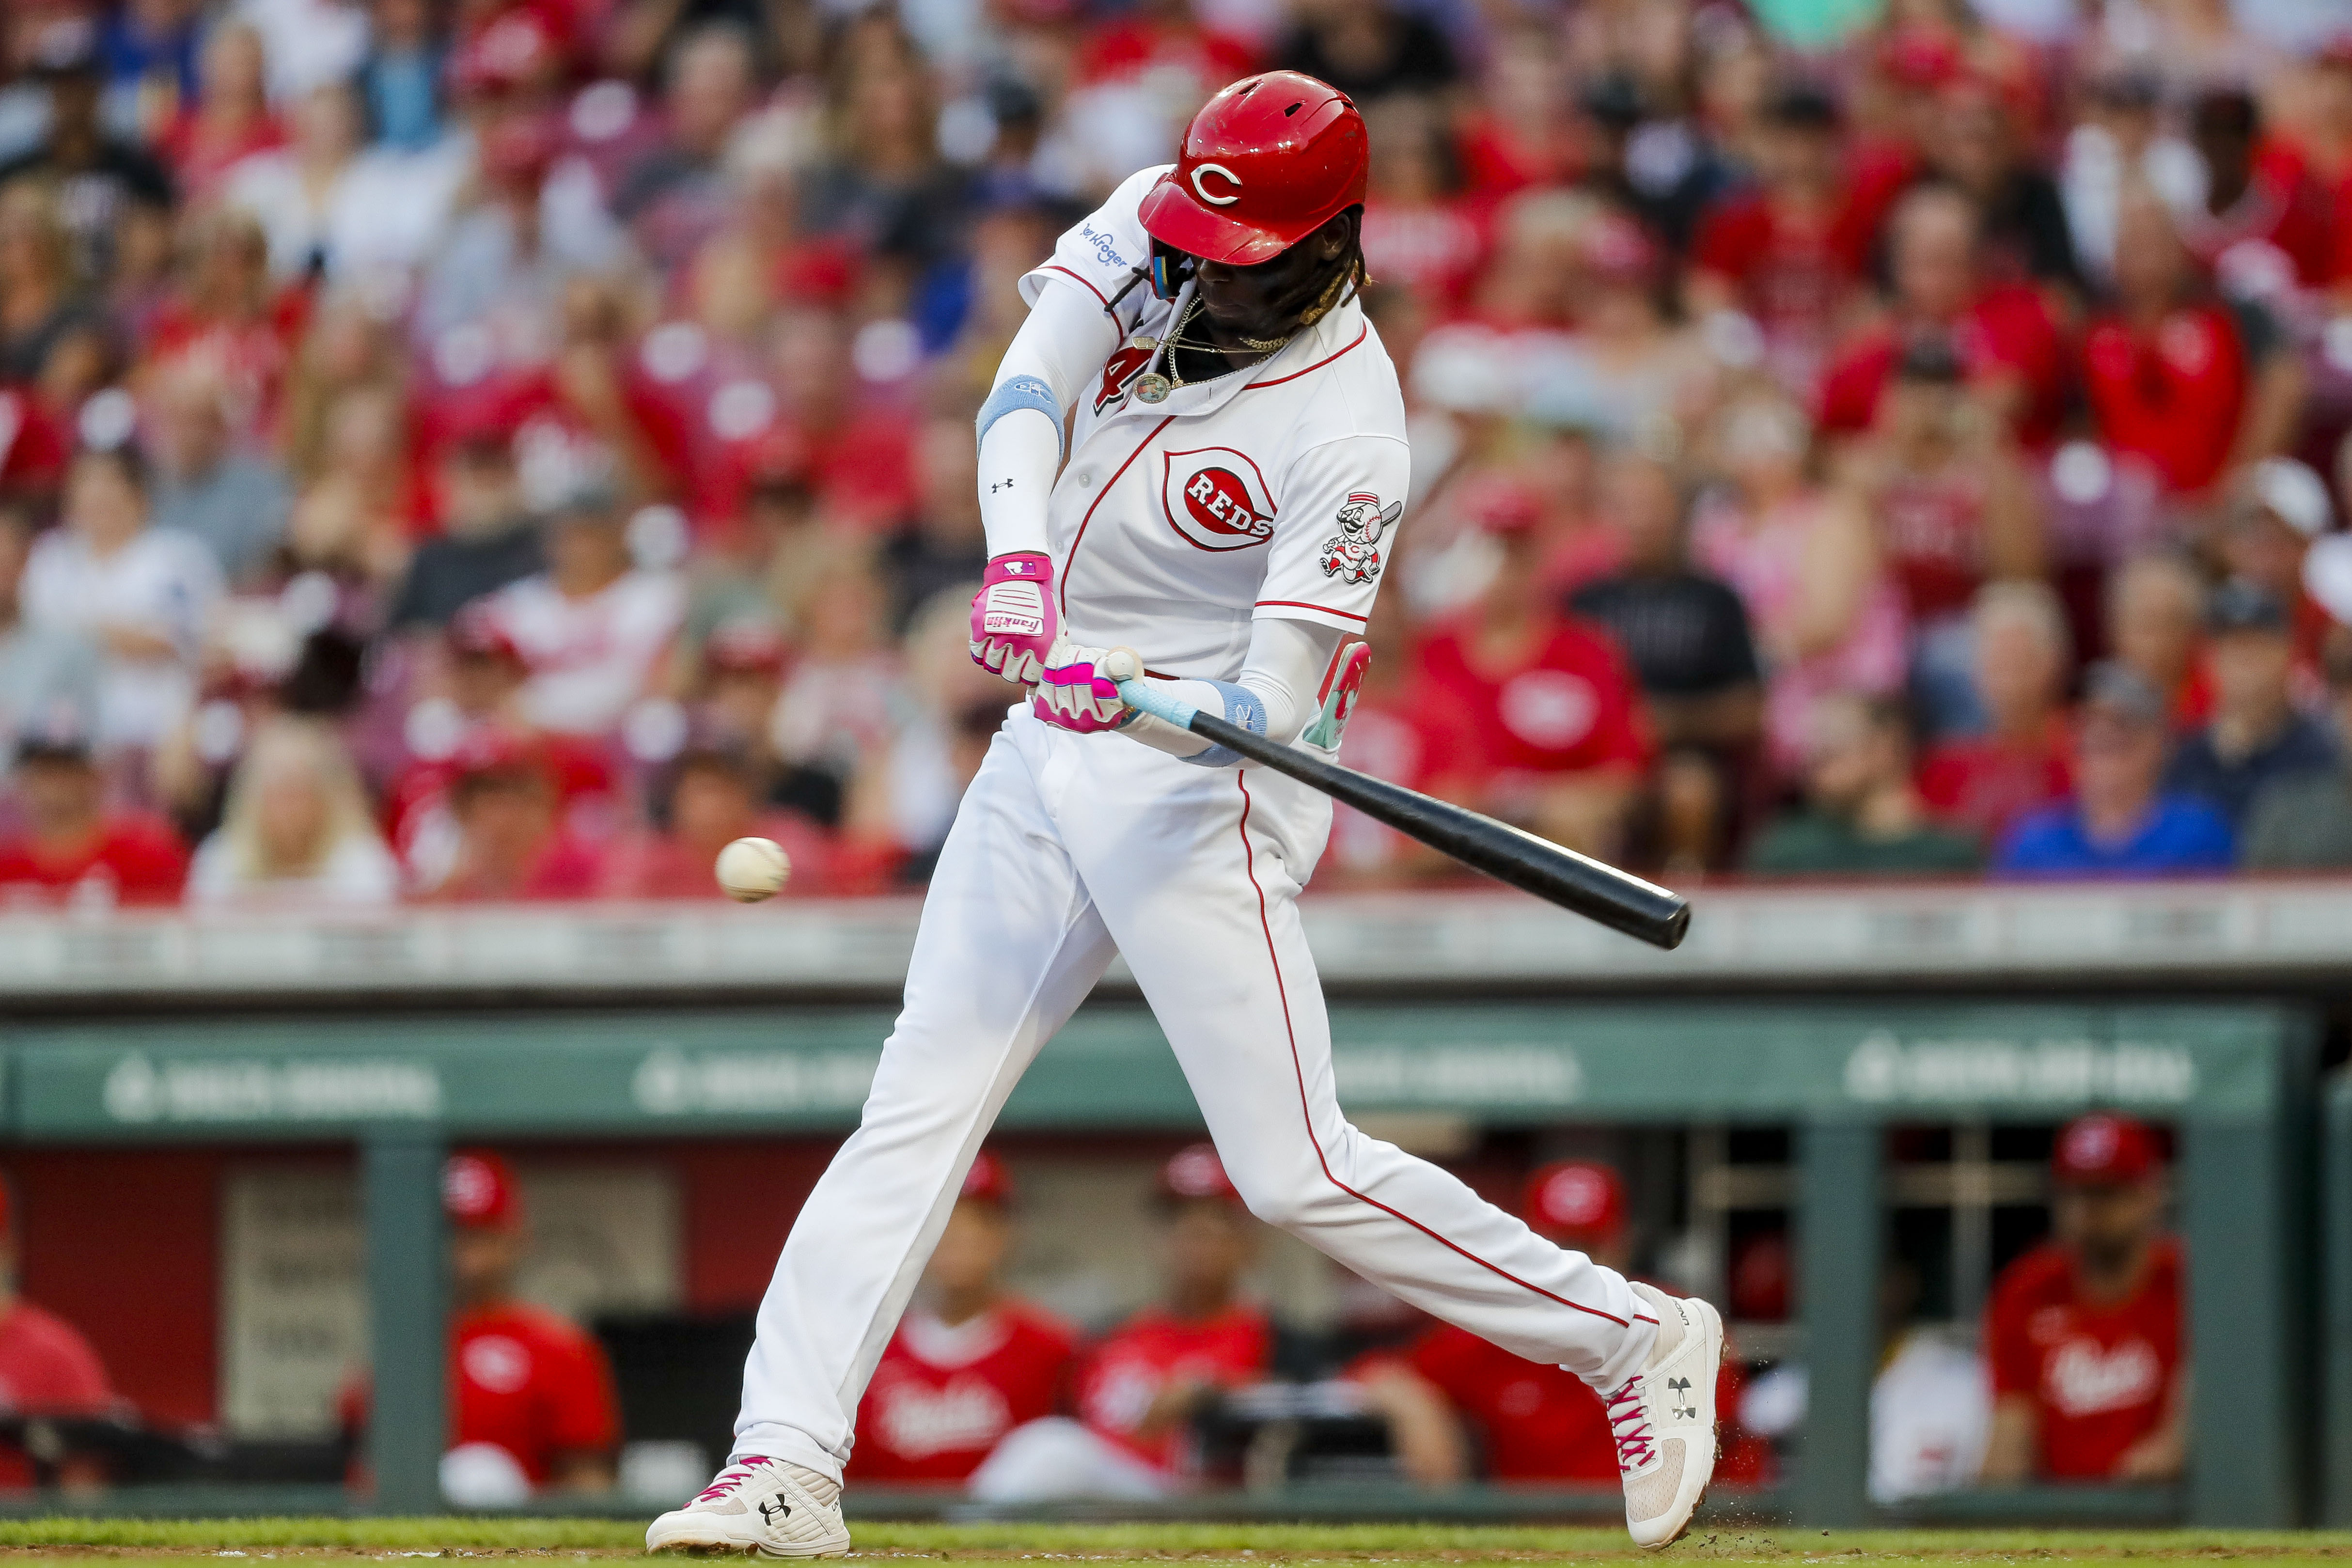 Nick Martini fuels Reds' late rally past Mariners